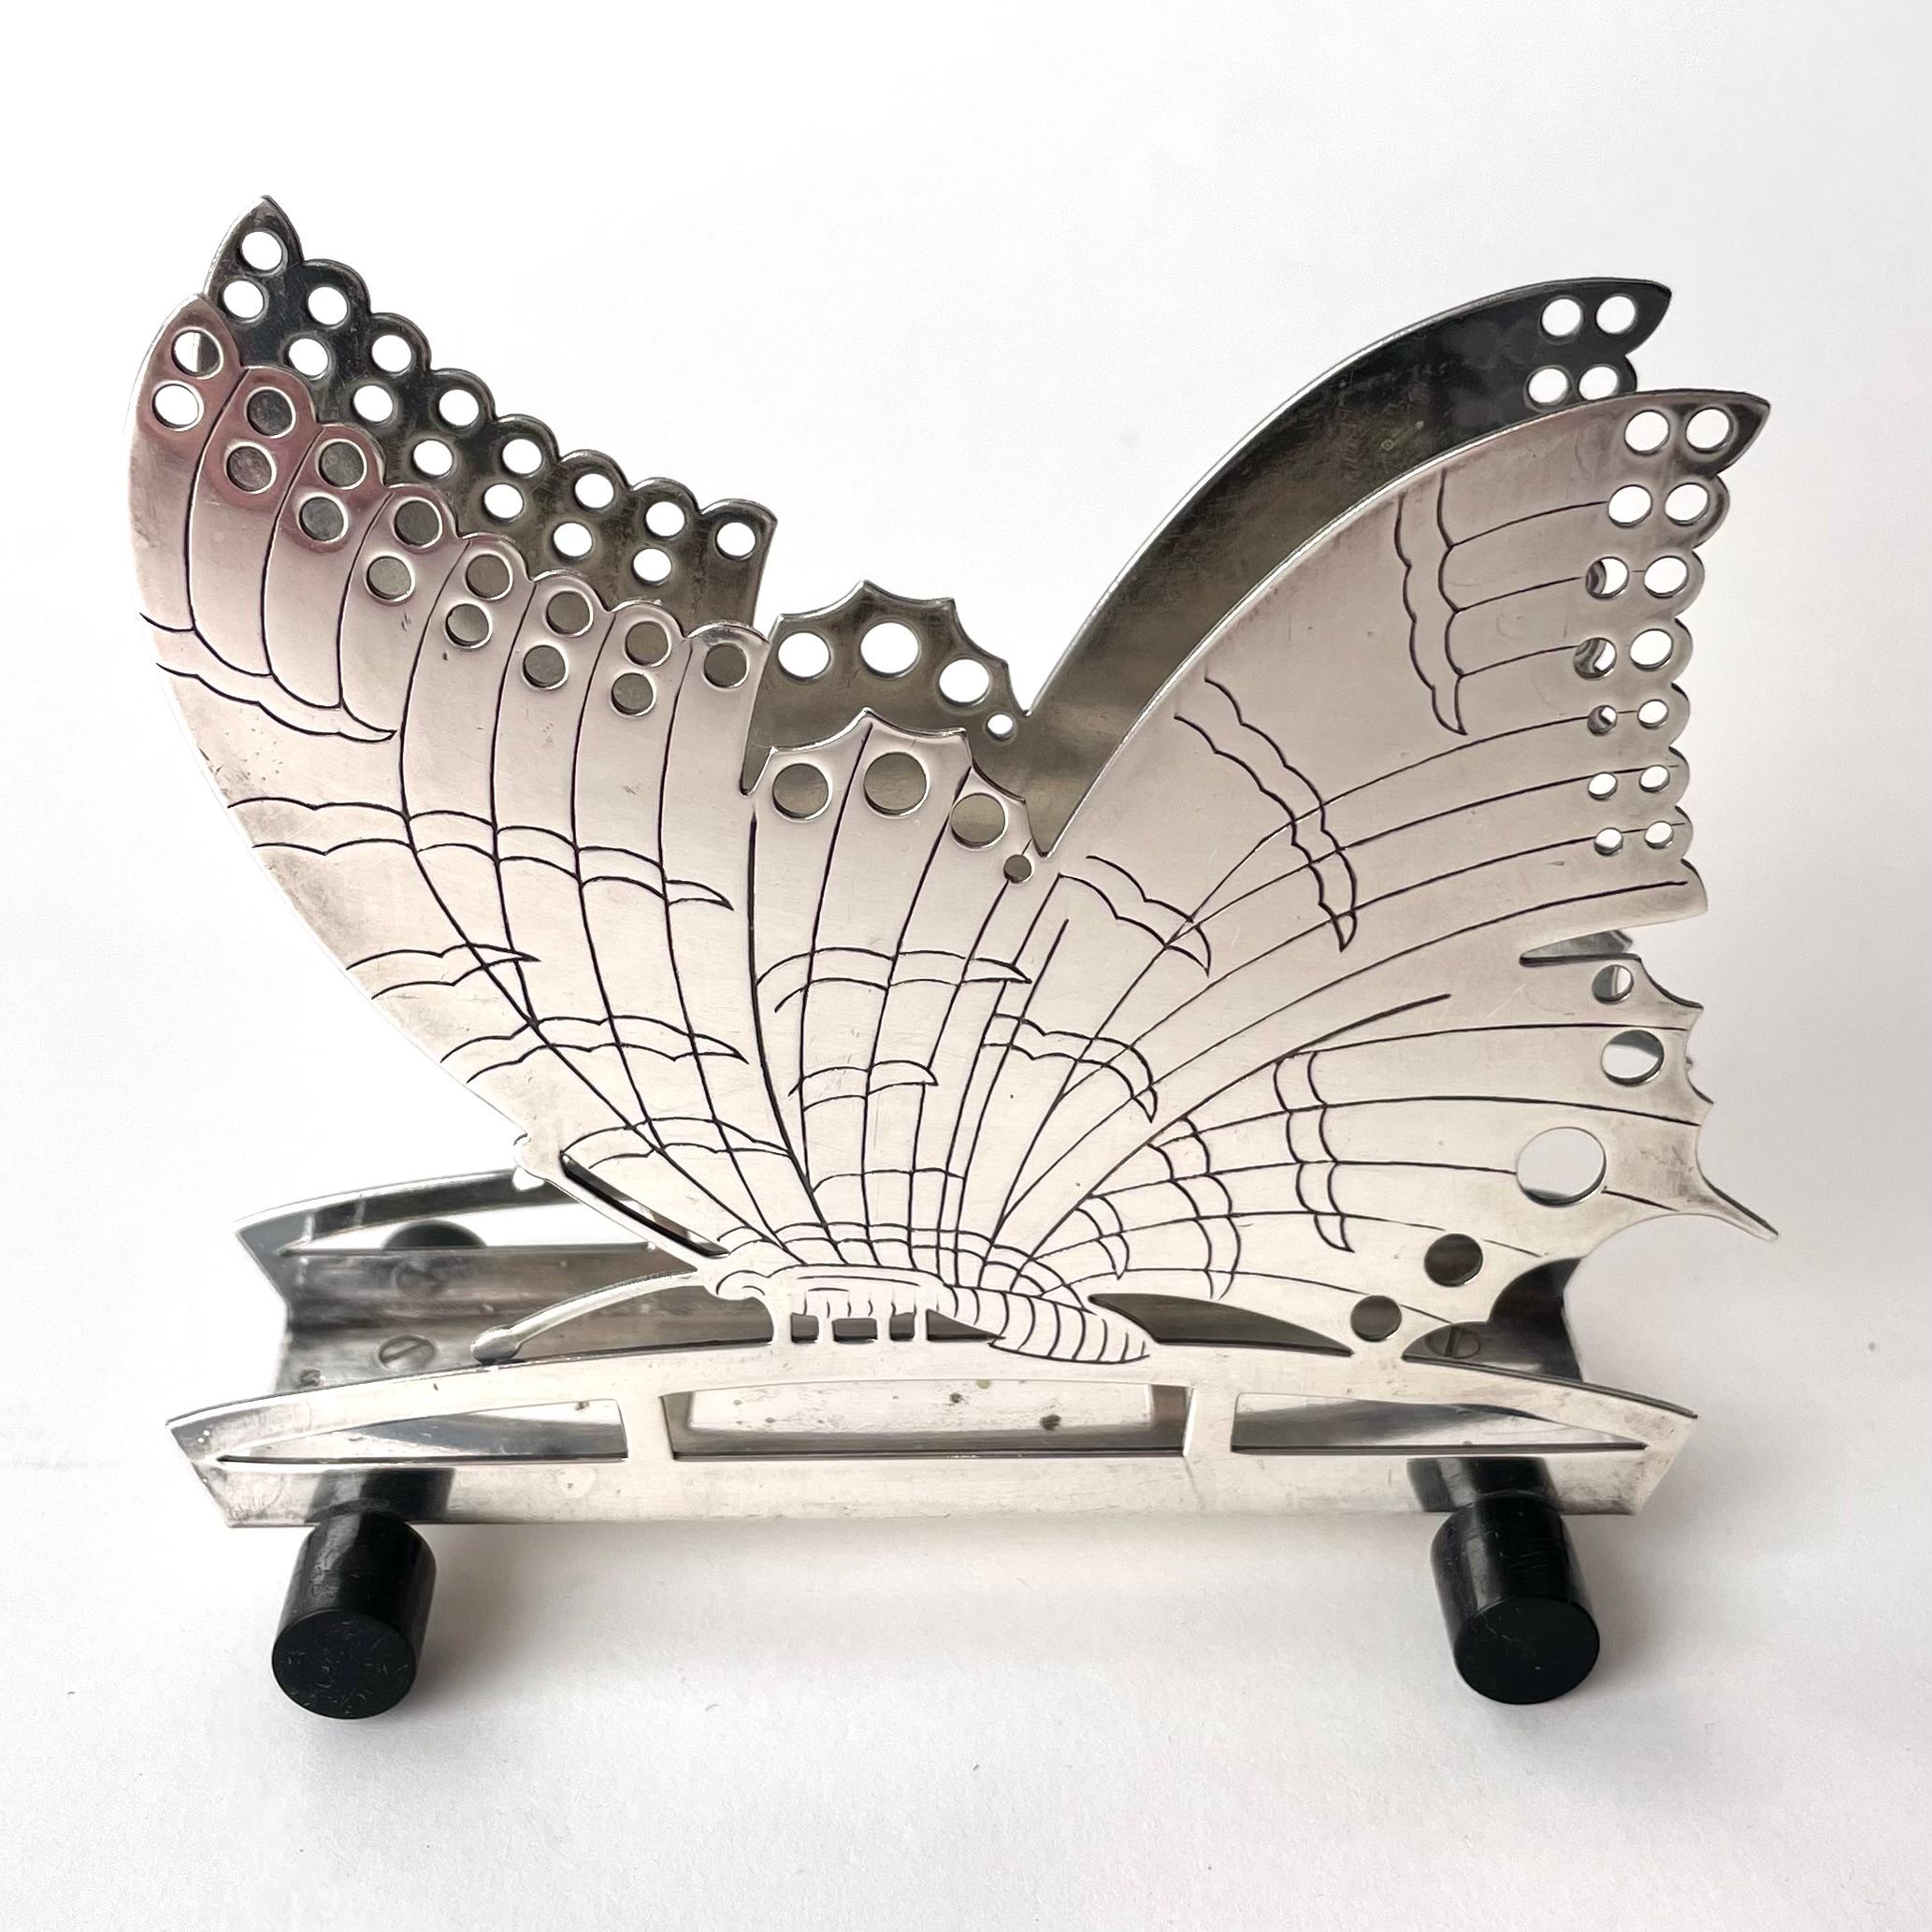 Silvered Art Deco Butterfly Napkin Holder Nickel Silver and Bakelite, 1920s-1930s